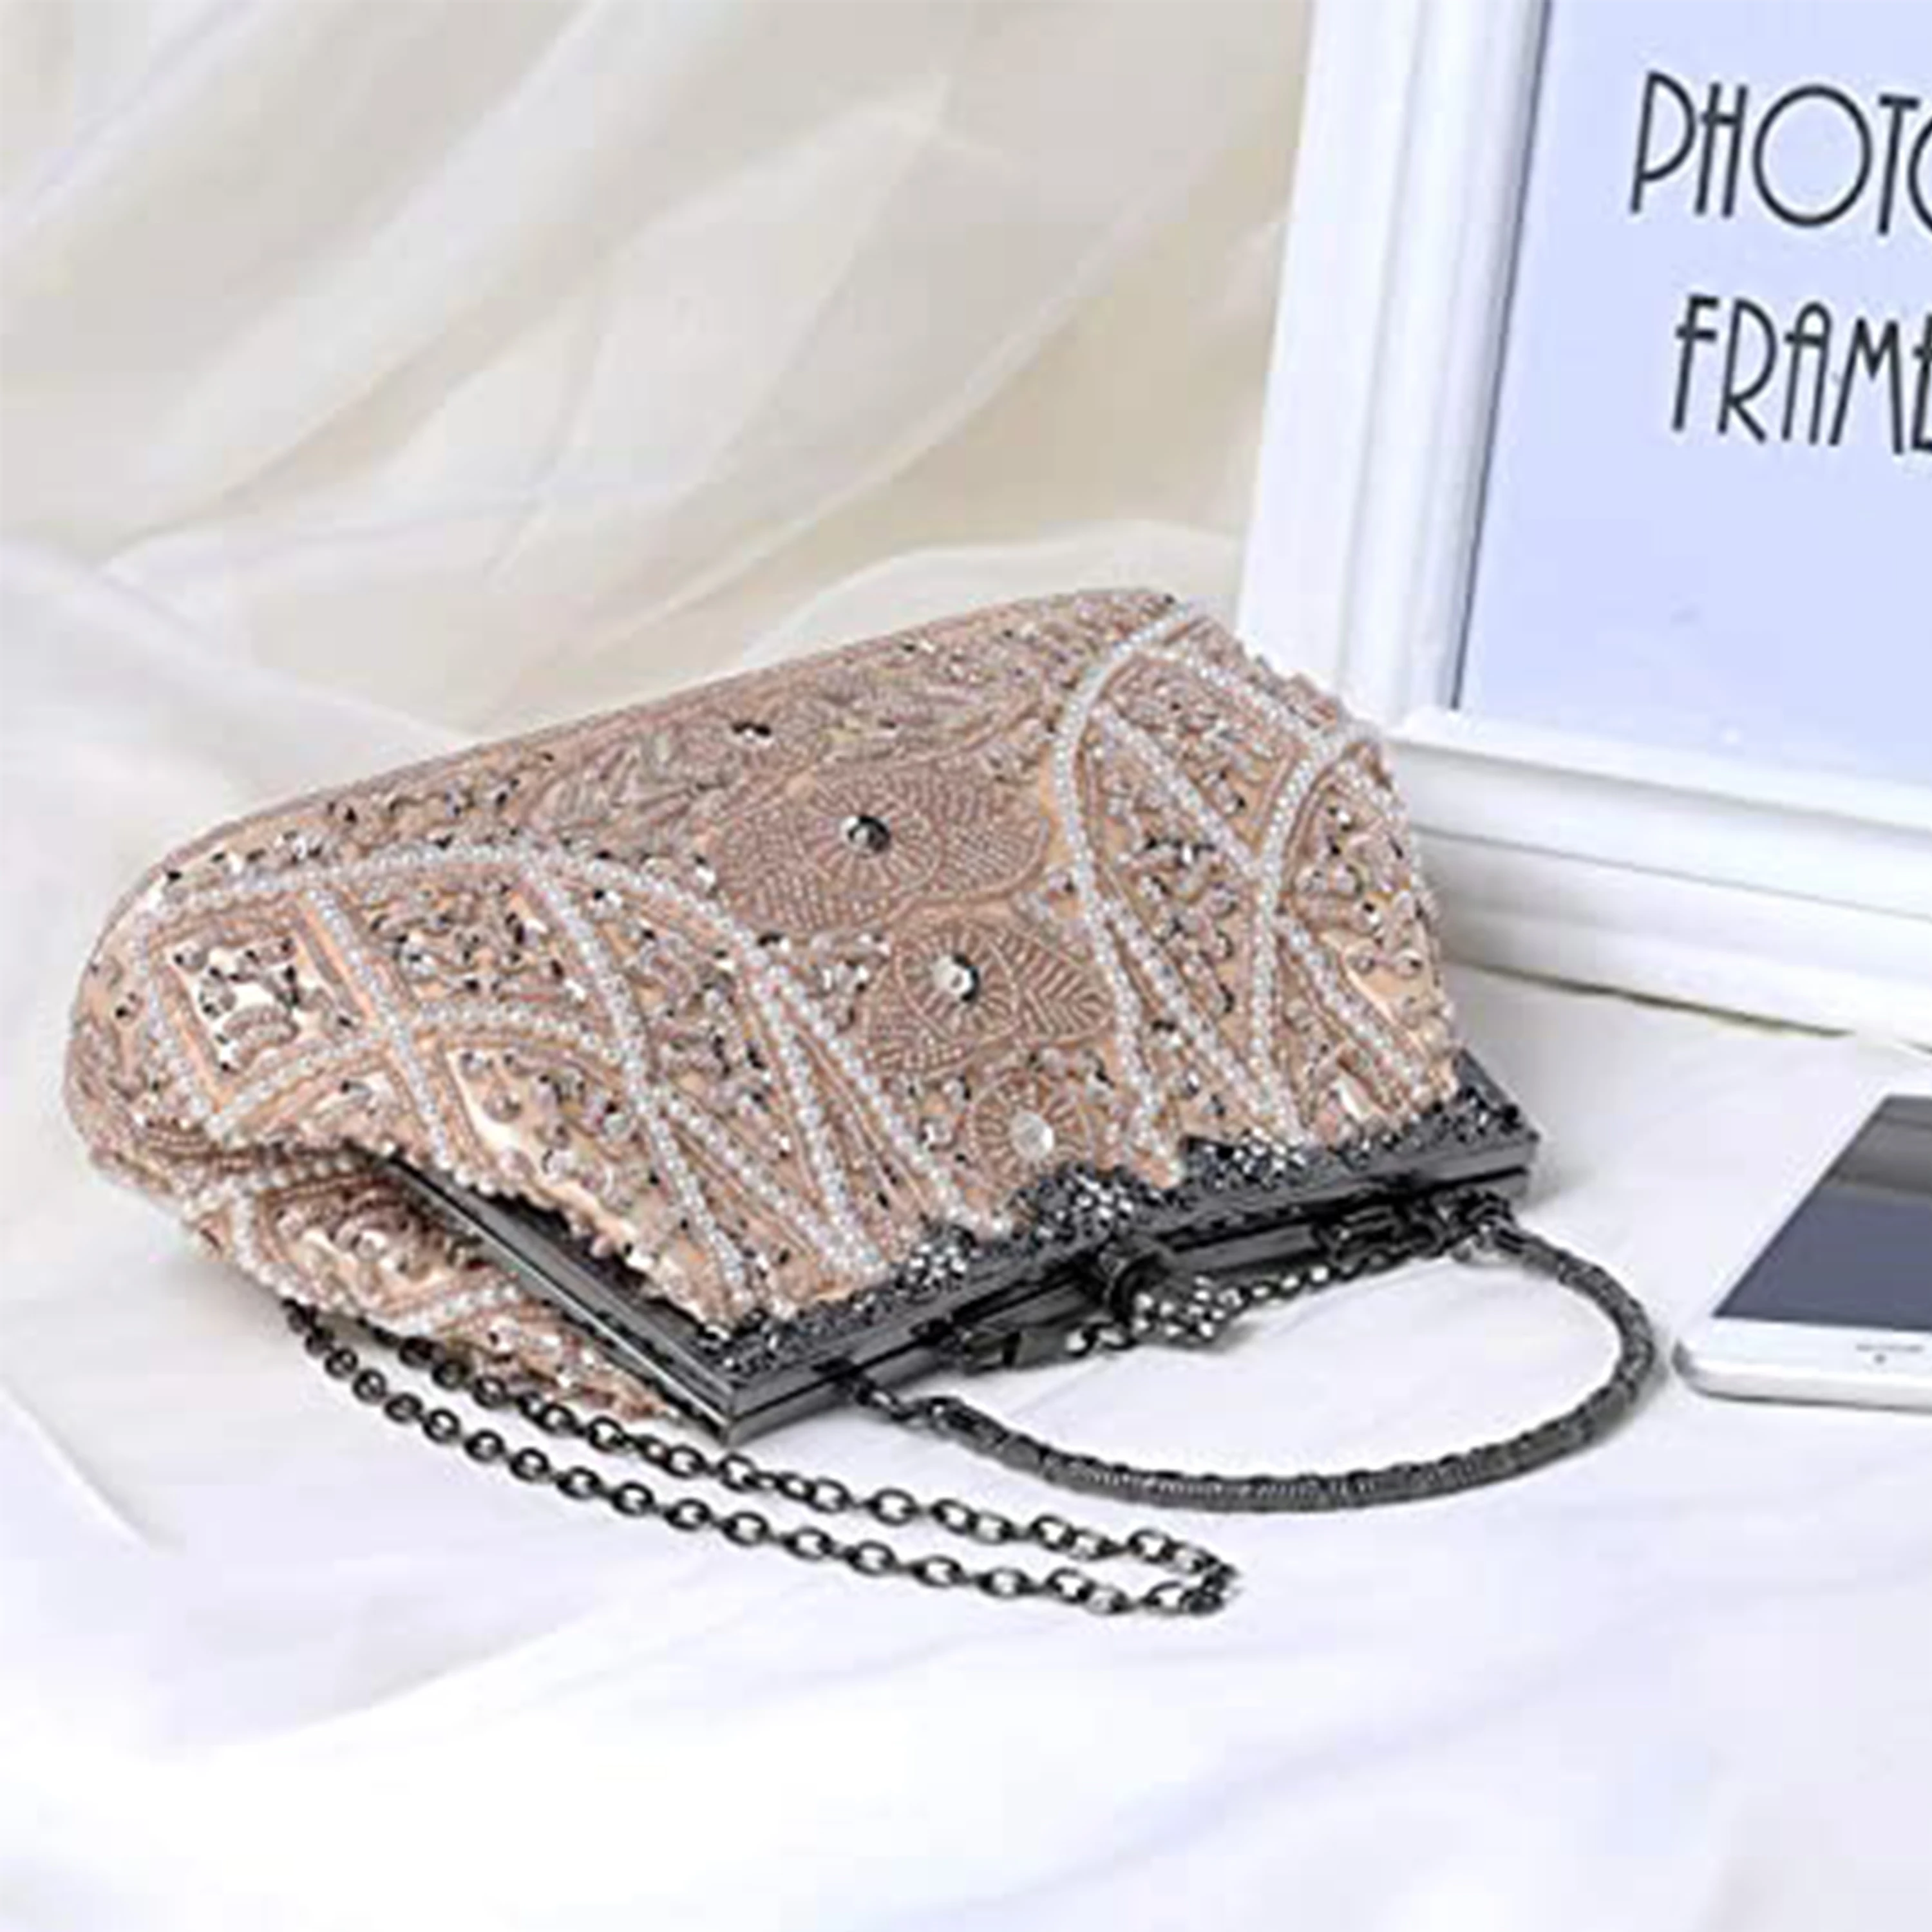 Roaring 20s Vintage Evening Bag For Women Beaded Sequin Pearl Wedding Purse Party Bridal Handbag Clutch Bag 1920s Gatsby Accessories